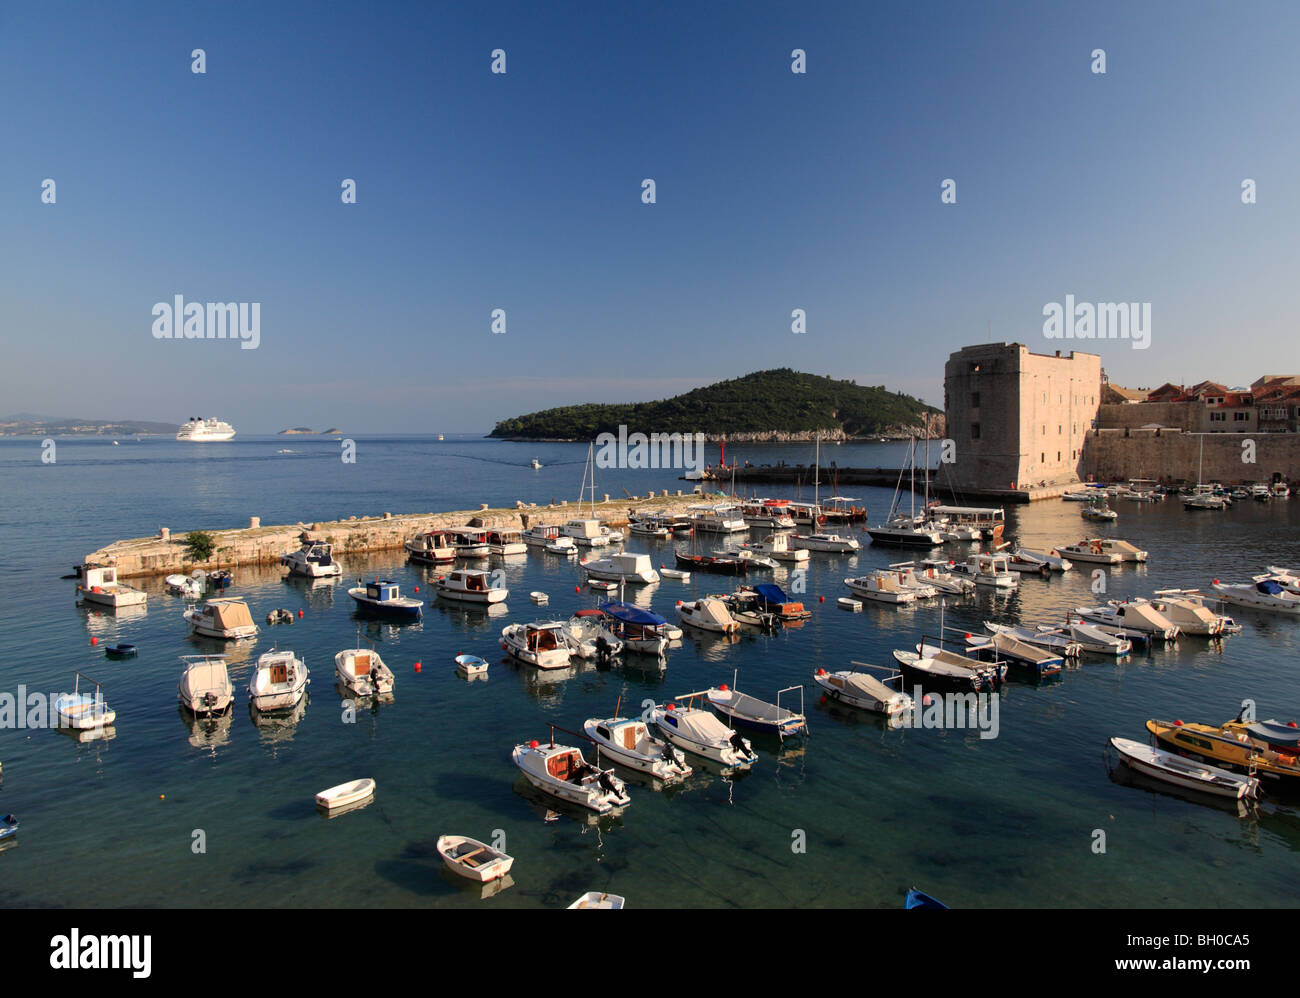 Dubrovnik Harbour with small fishing boats and large cruise liner moored in the bay Croatia Stock Photo